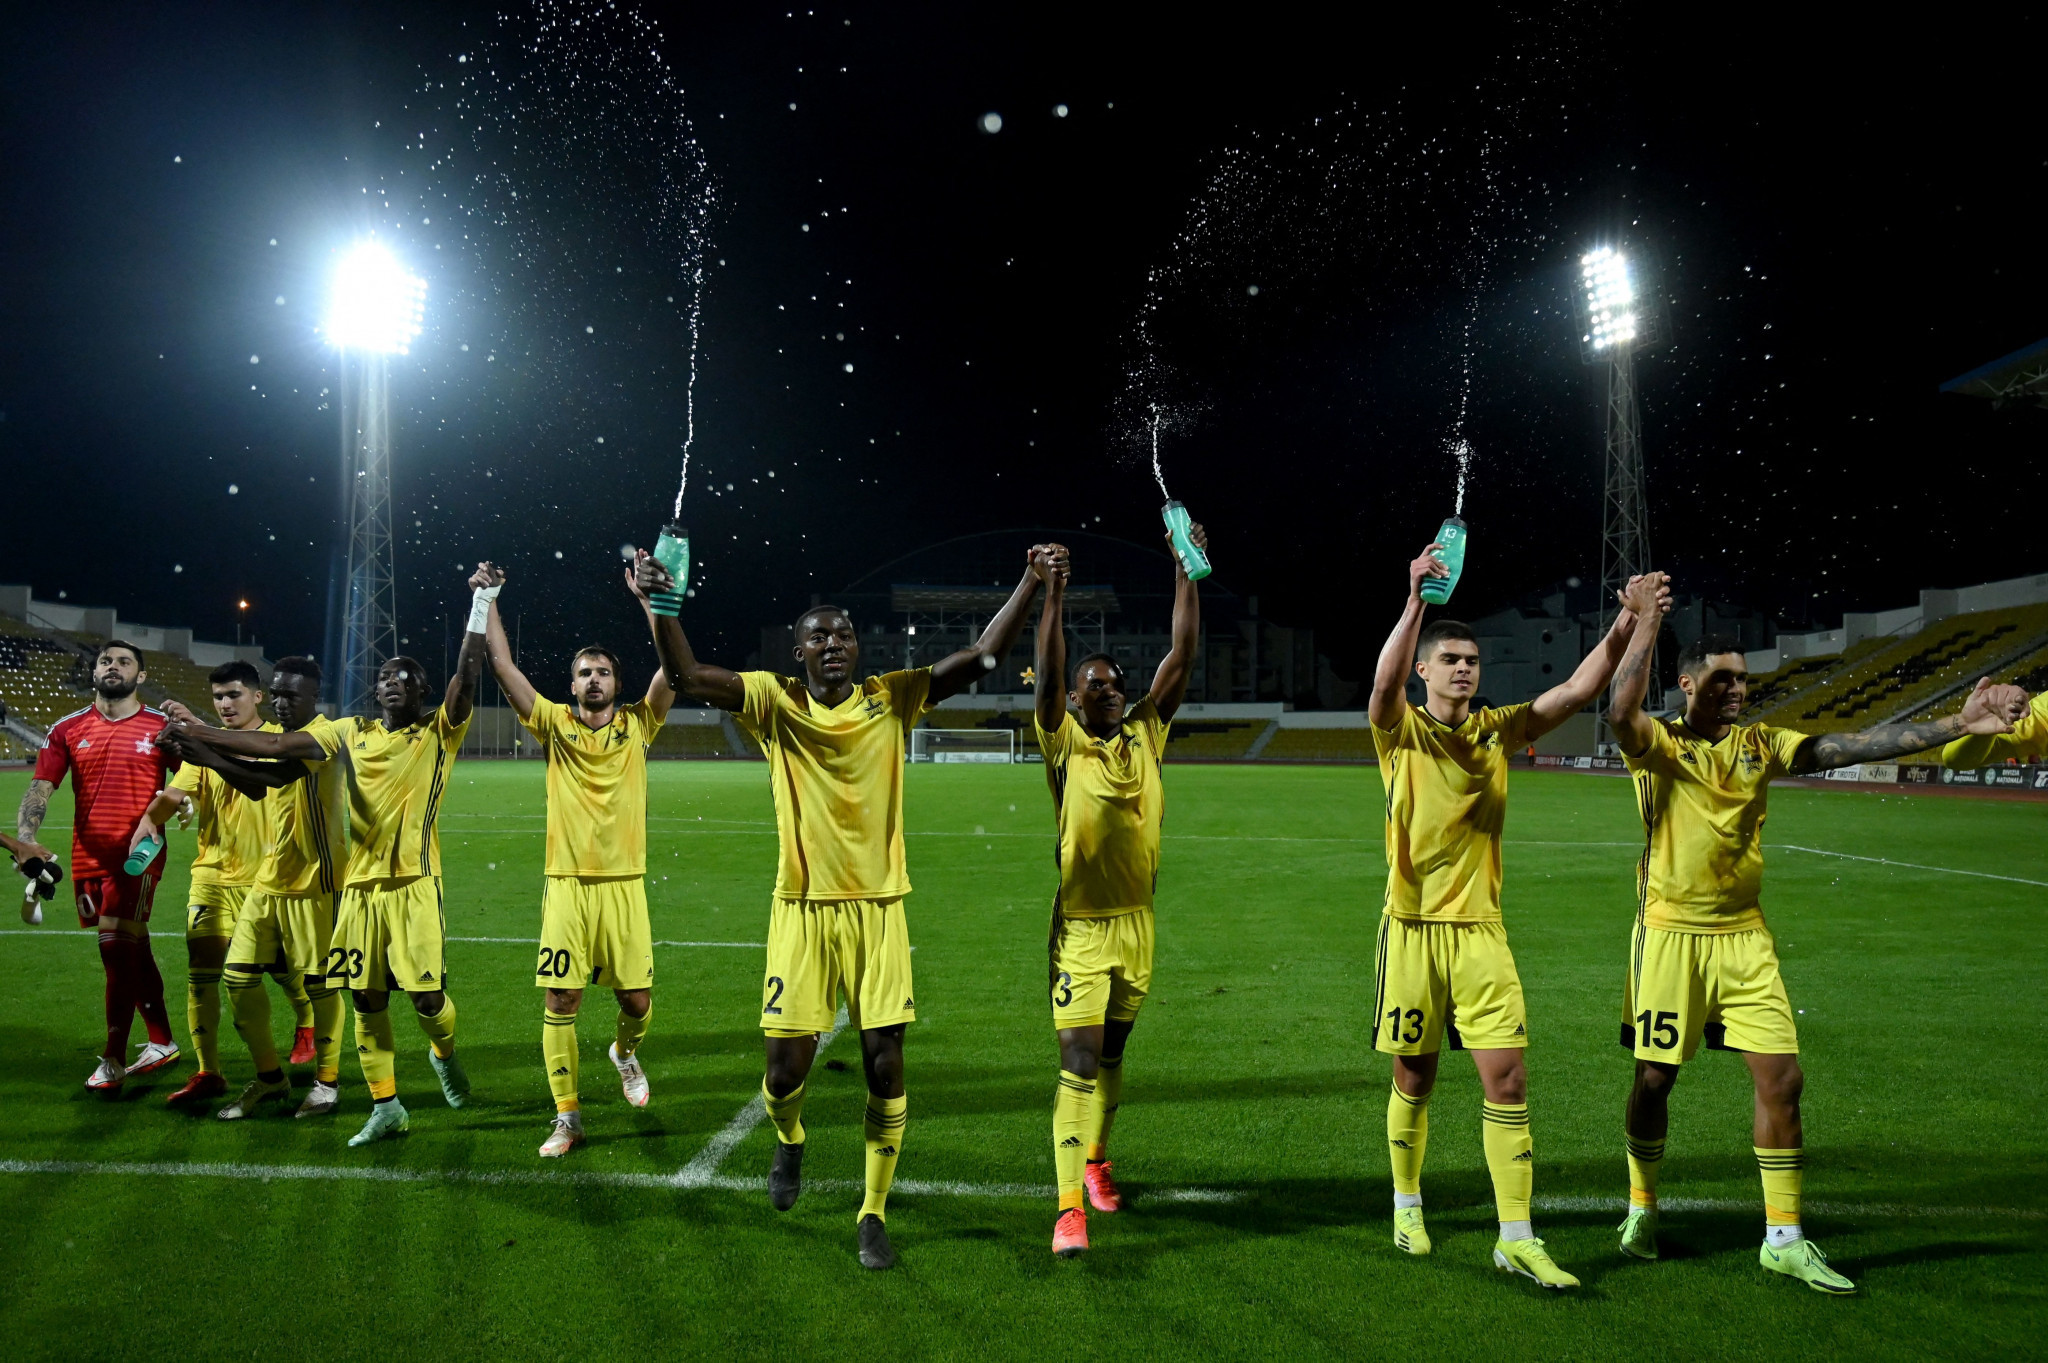 The FC Sheriff Tiraspol match versus FK Partizan Belgrade is set to be played behind closed doors ©Getty Images